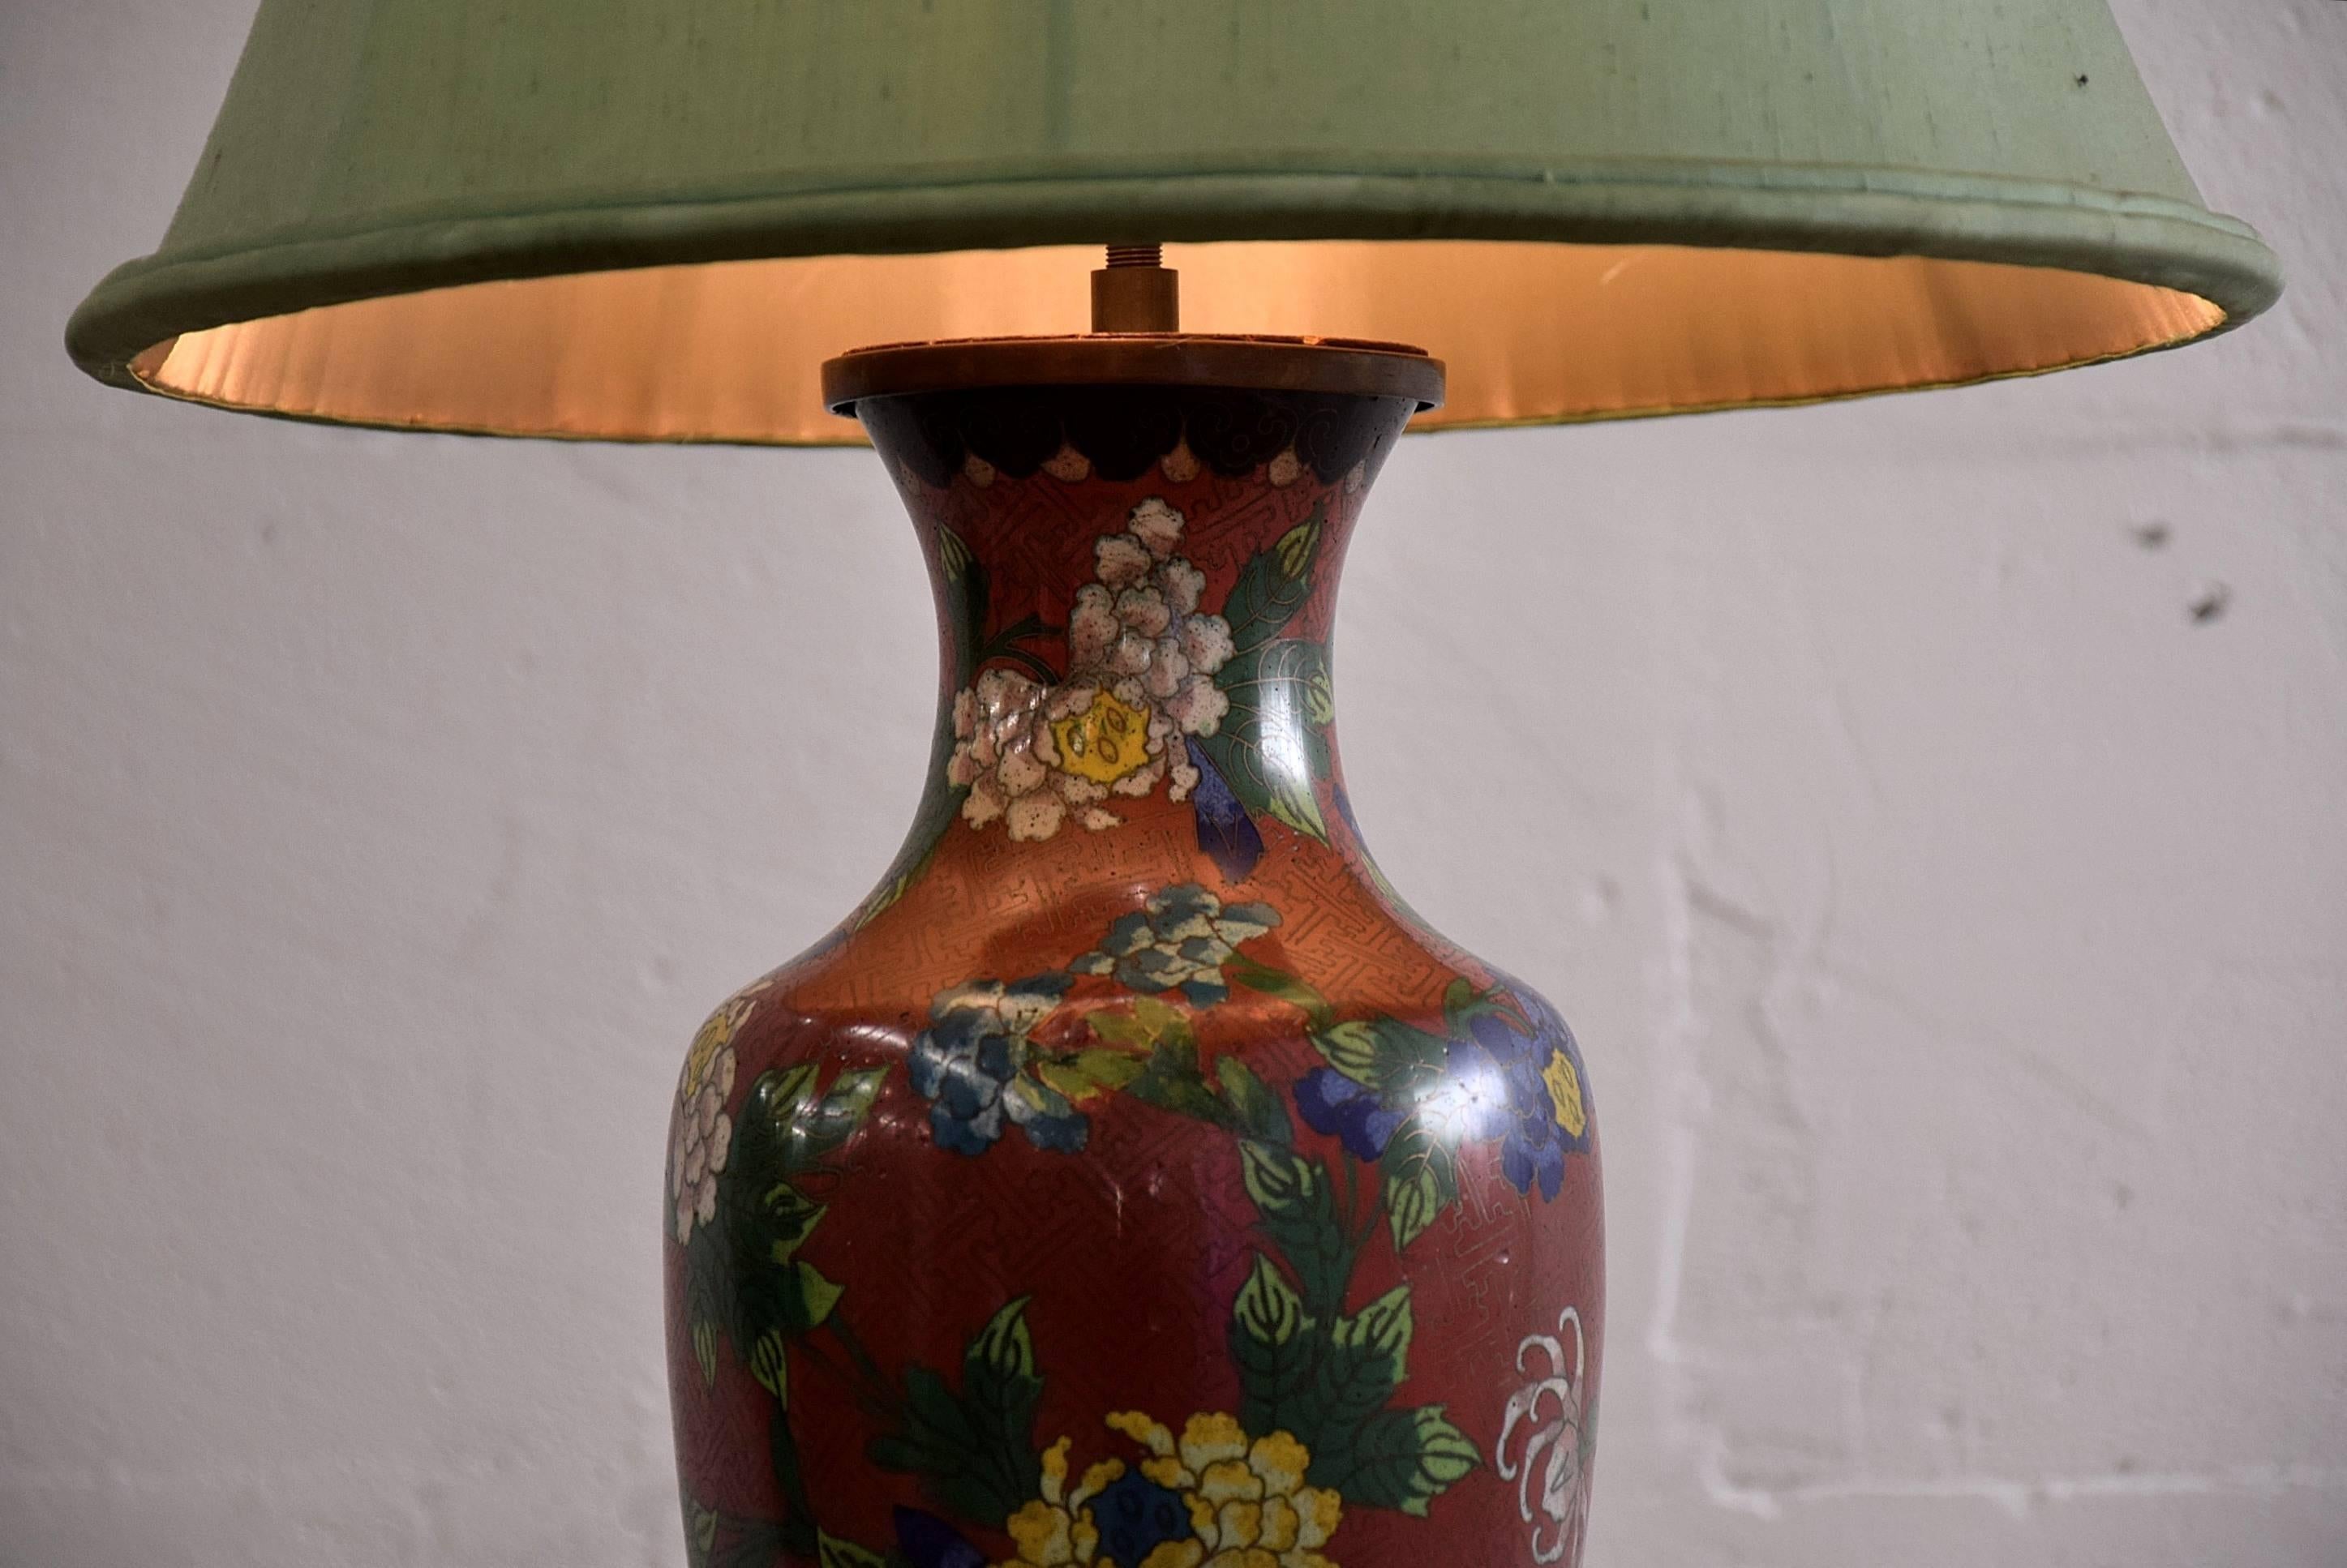 Beautiful ceramic Chinese Mid-Century cloisonné table lamp with stunning shade.

This lamp gives almost any interior that extra touch of style.

It is in great condition.

Measurement: H.71 x D.37 cm.

Cloisonné is an ancient technique for